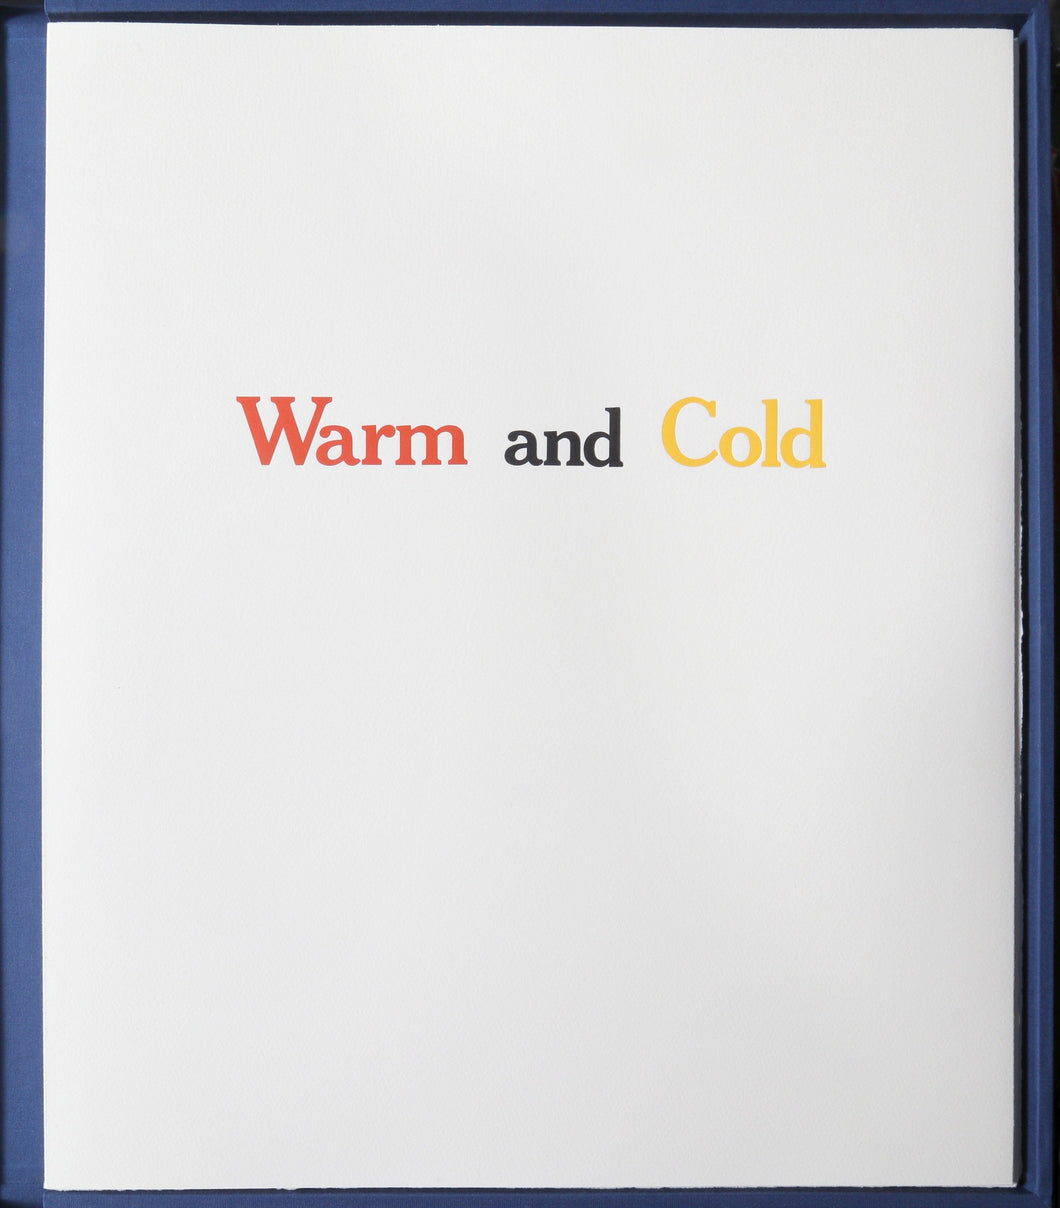 Warm and Cold (with David Mamet) Lithograph | Donald Sultan,{{product.type}}